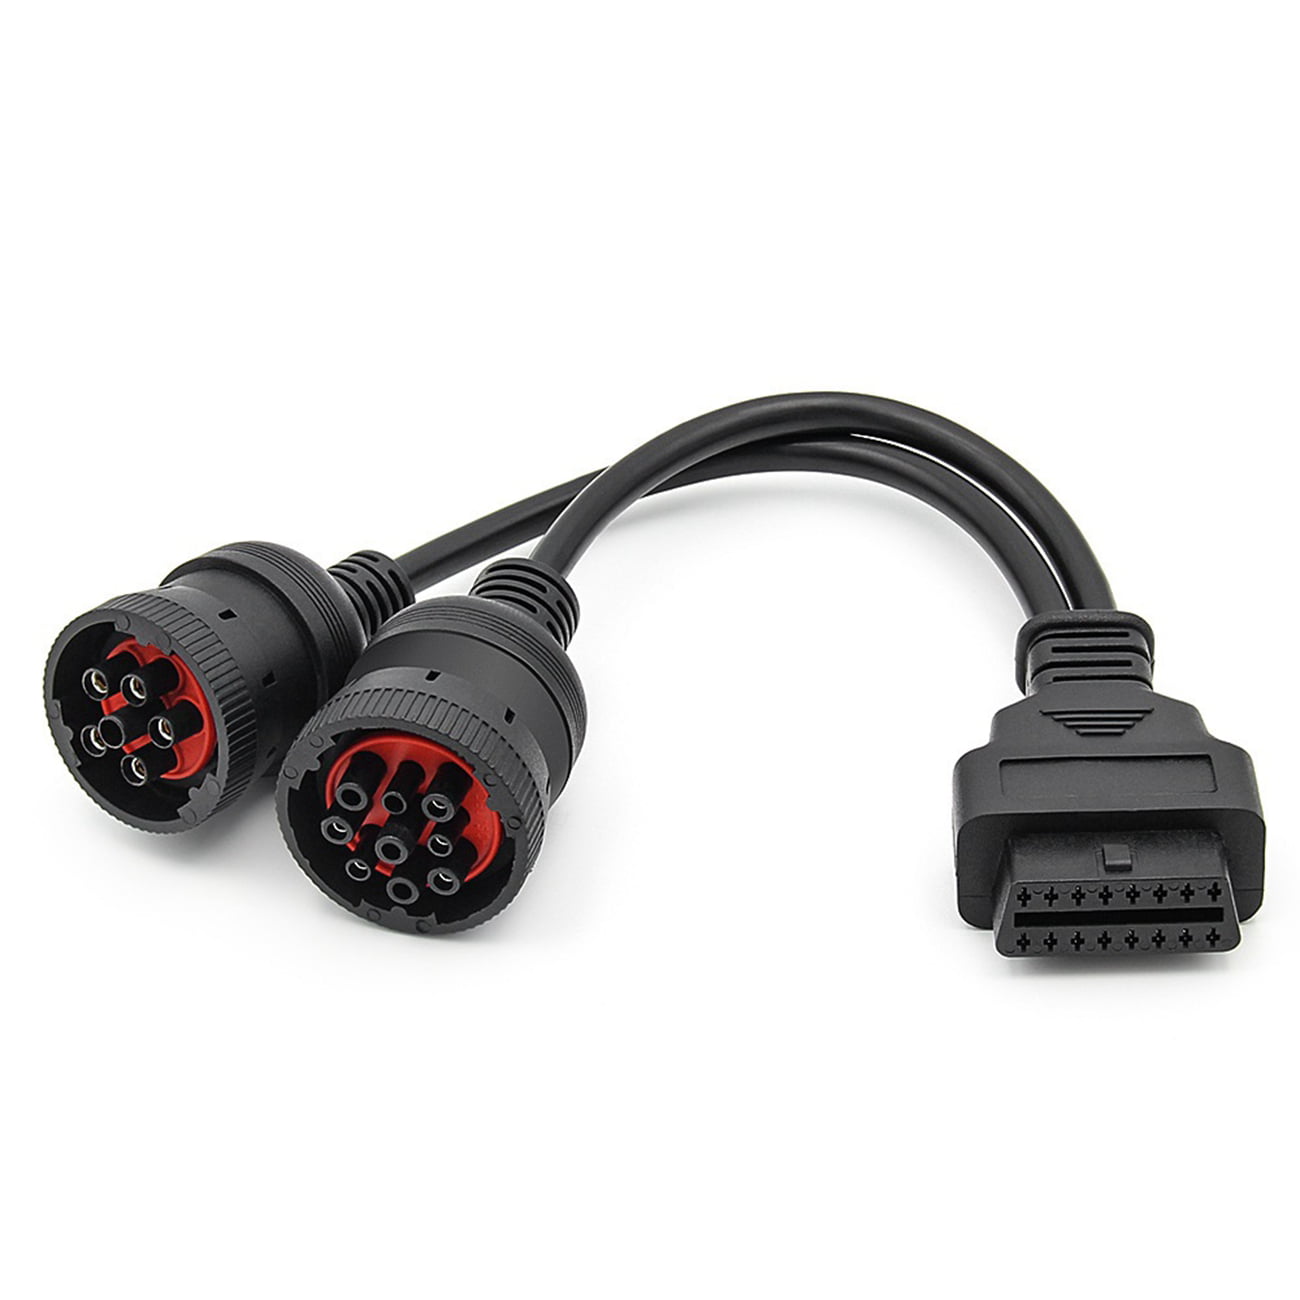 GAZ 12 to 16 pin OBD2 OBDII Male to Female Diesel Truck Diagnostic Cable adapter 